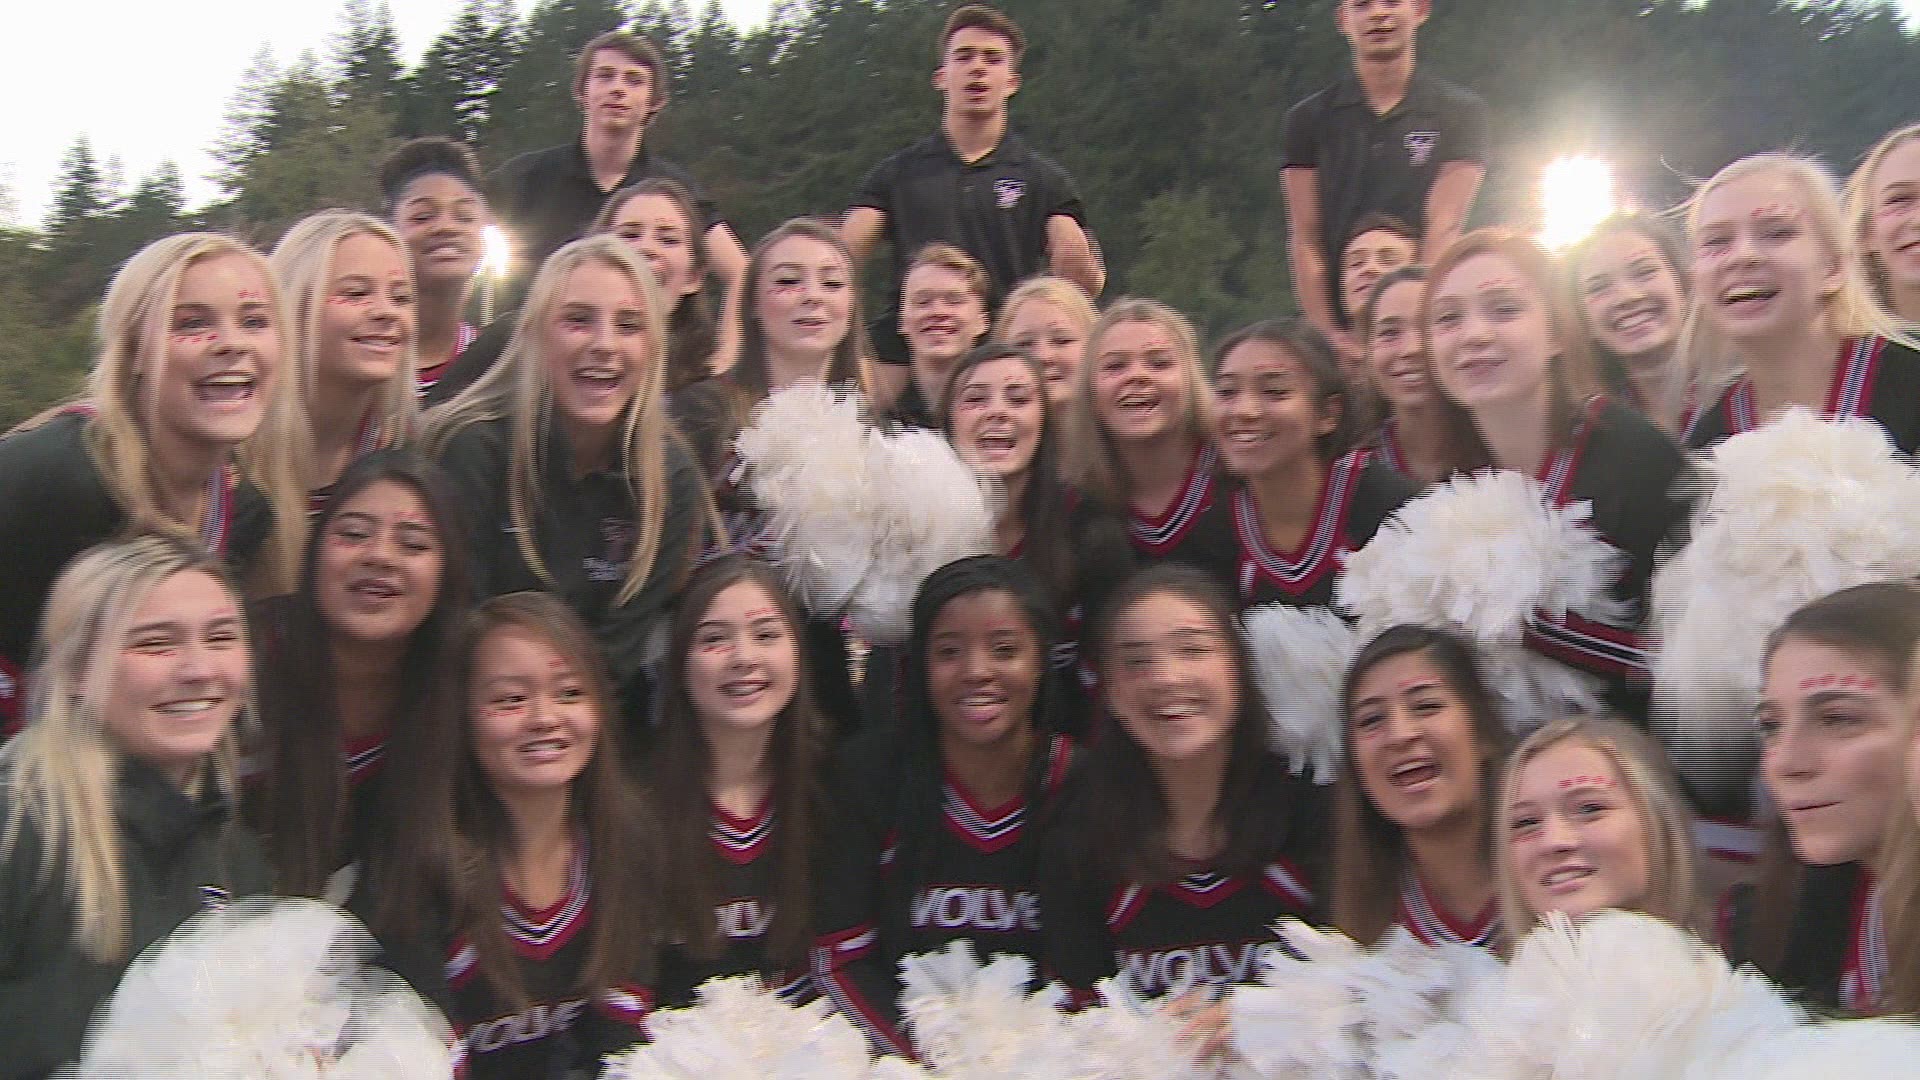 Highlights of the Tualatin Timberwolves' 2018 season in Oregon. The Timberwolves finished with a 7-4 record. All highlights aired on KGW's Friday Night Flights #KGWPreps